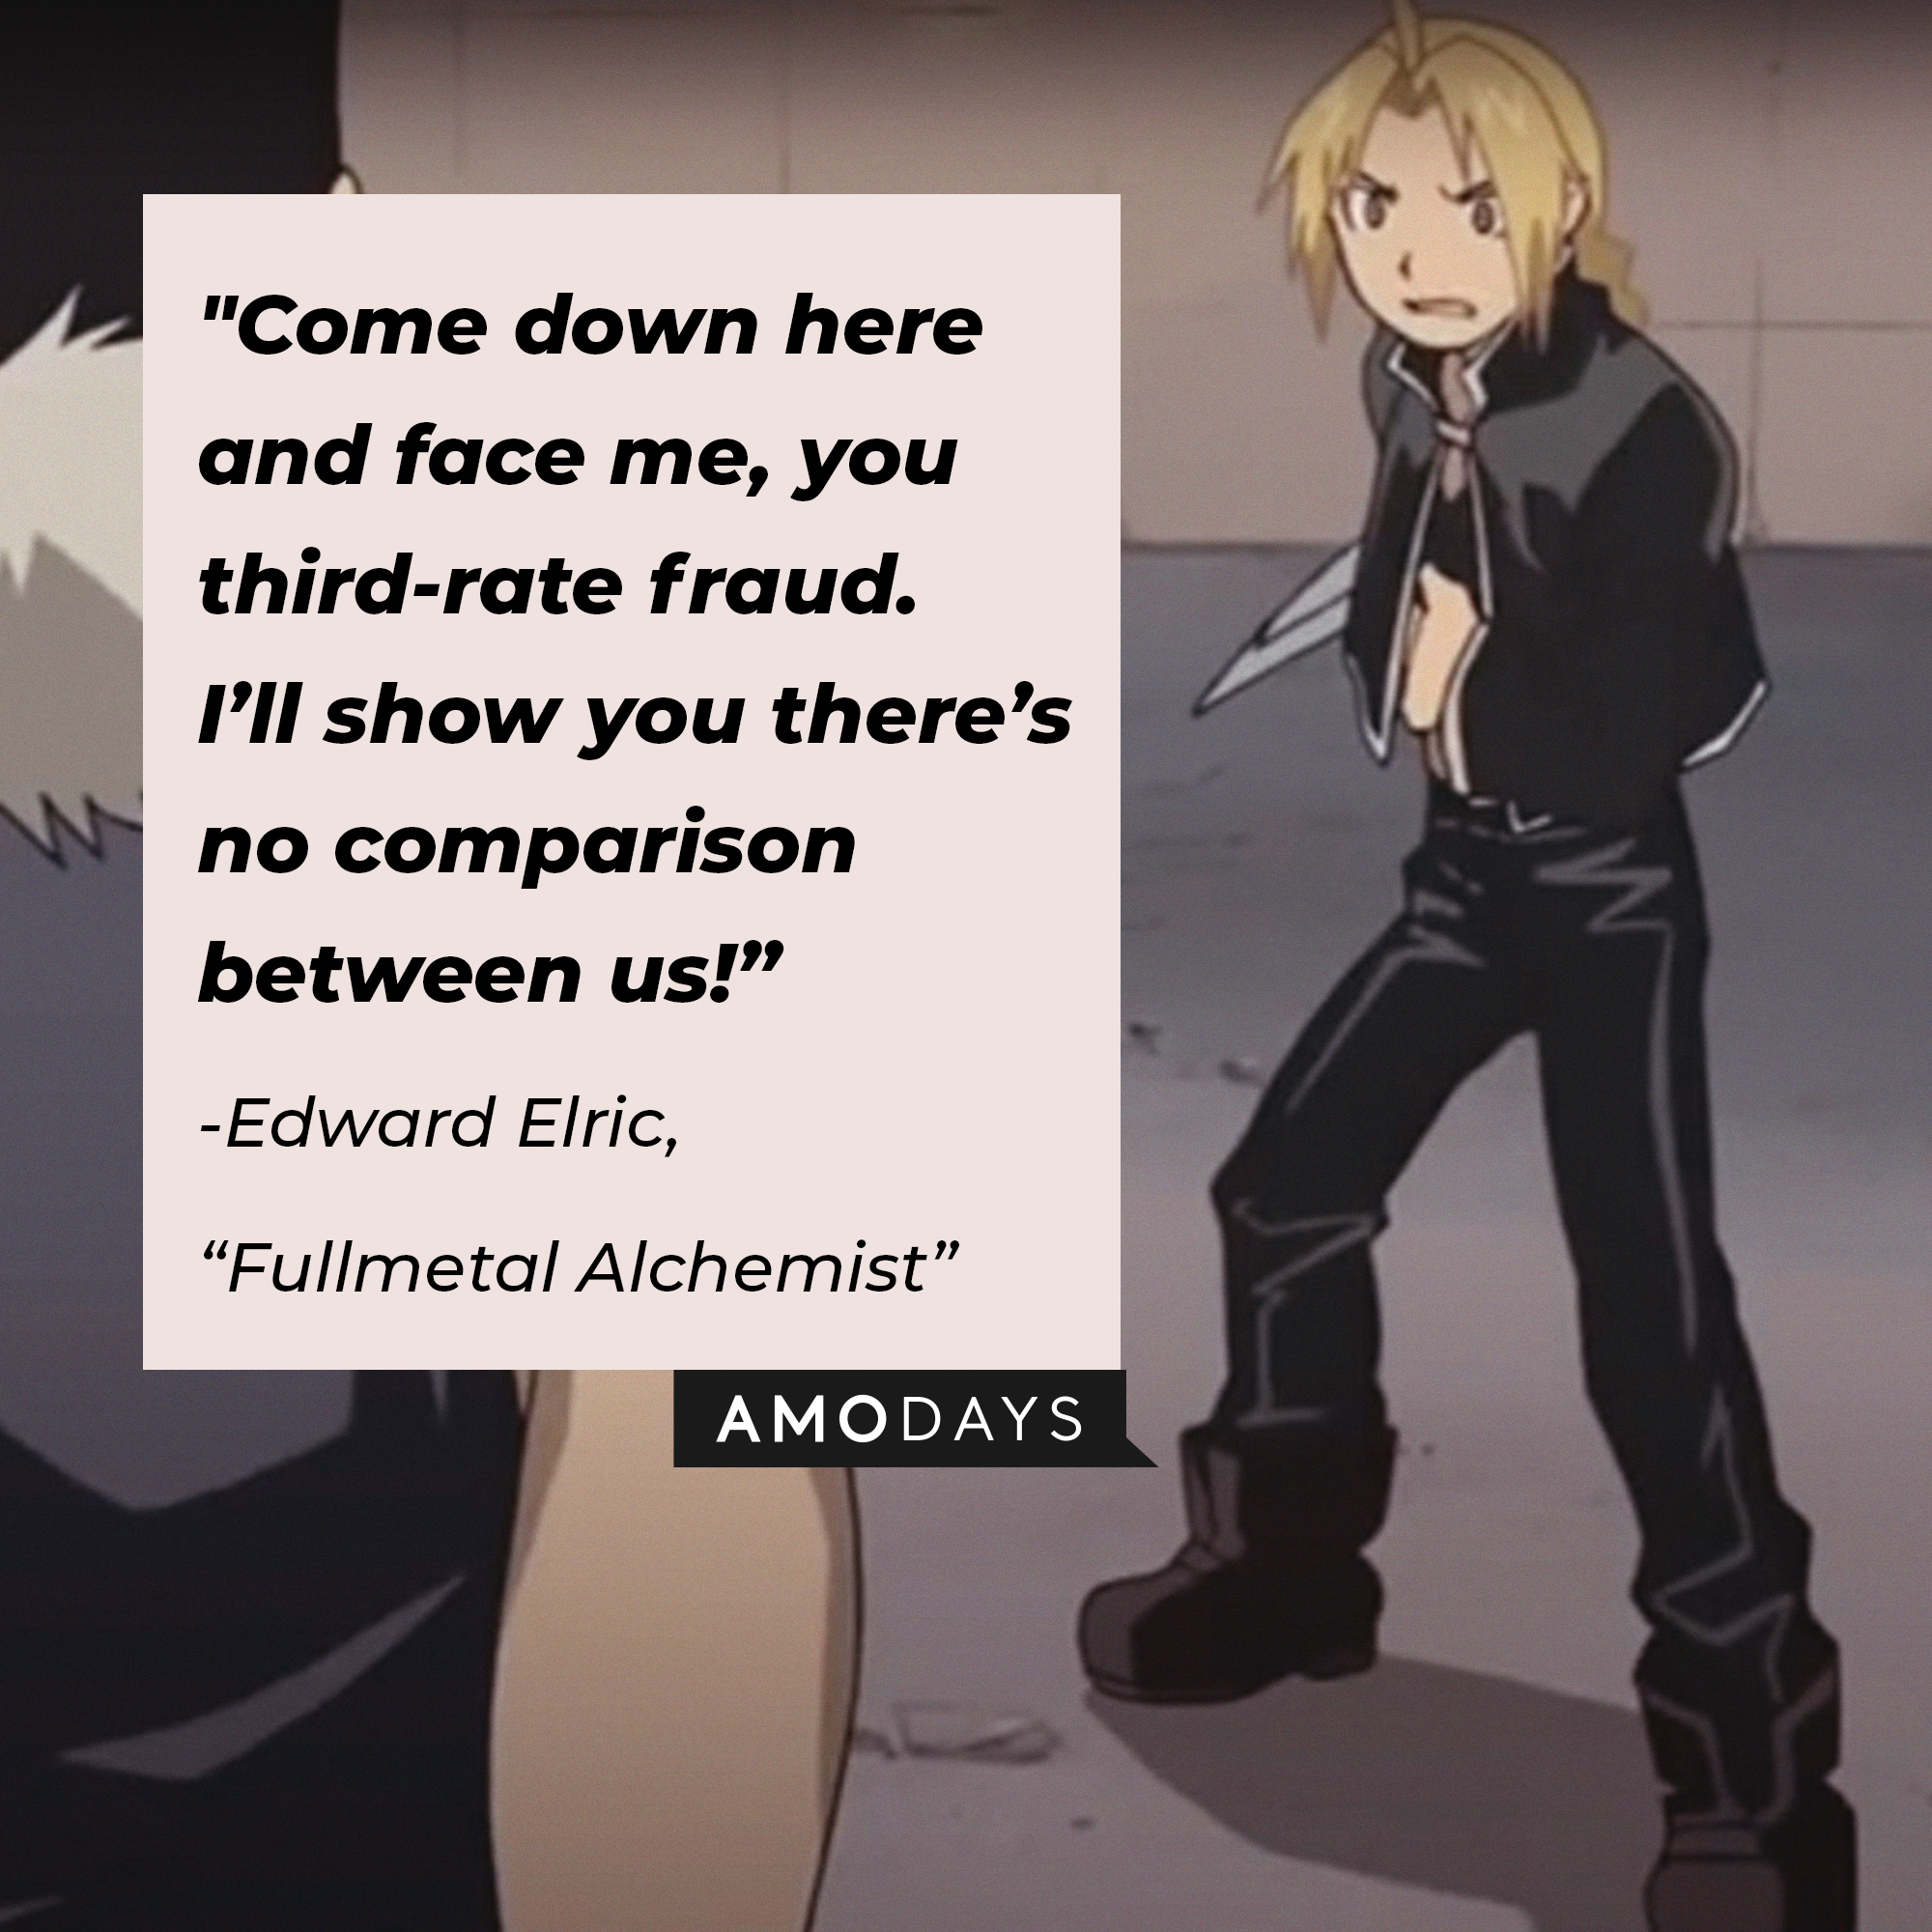 Edward Elric's quote: "Come down here and face me, you third-rate fraud. I’ll show you there’s no comparison between us!” | Image: AmoDays